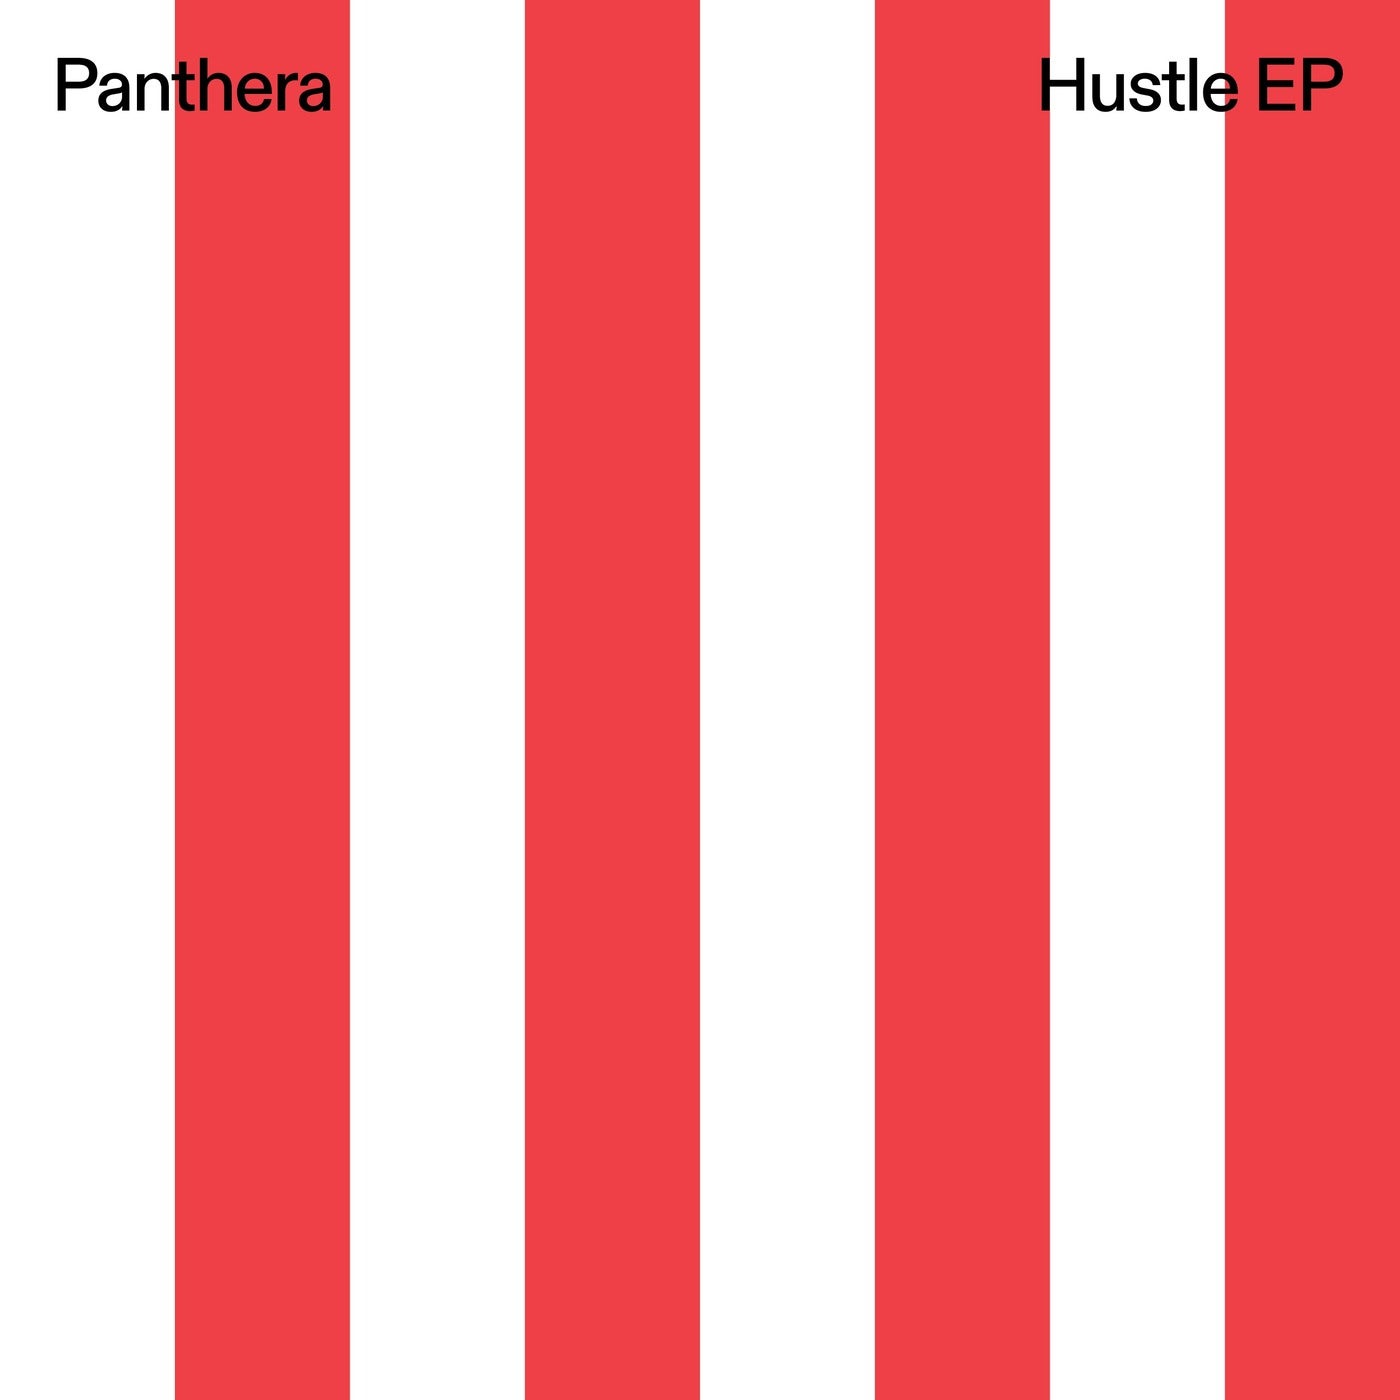 Cover - Panthera - Western Union (Endrik Schroeder Slicing Remix)